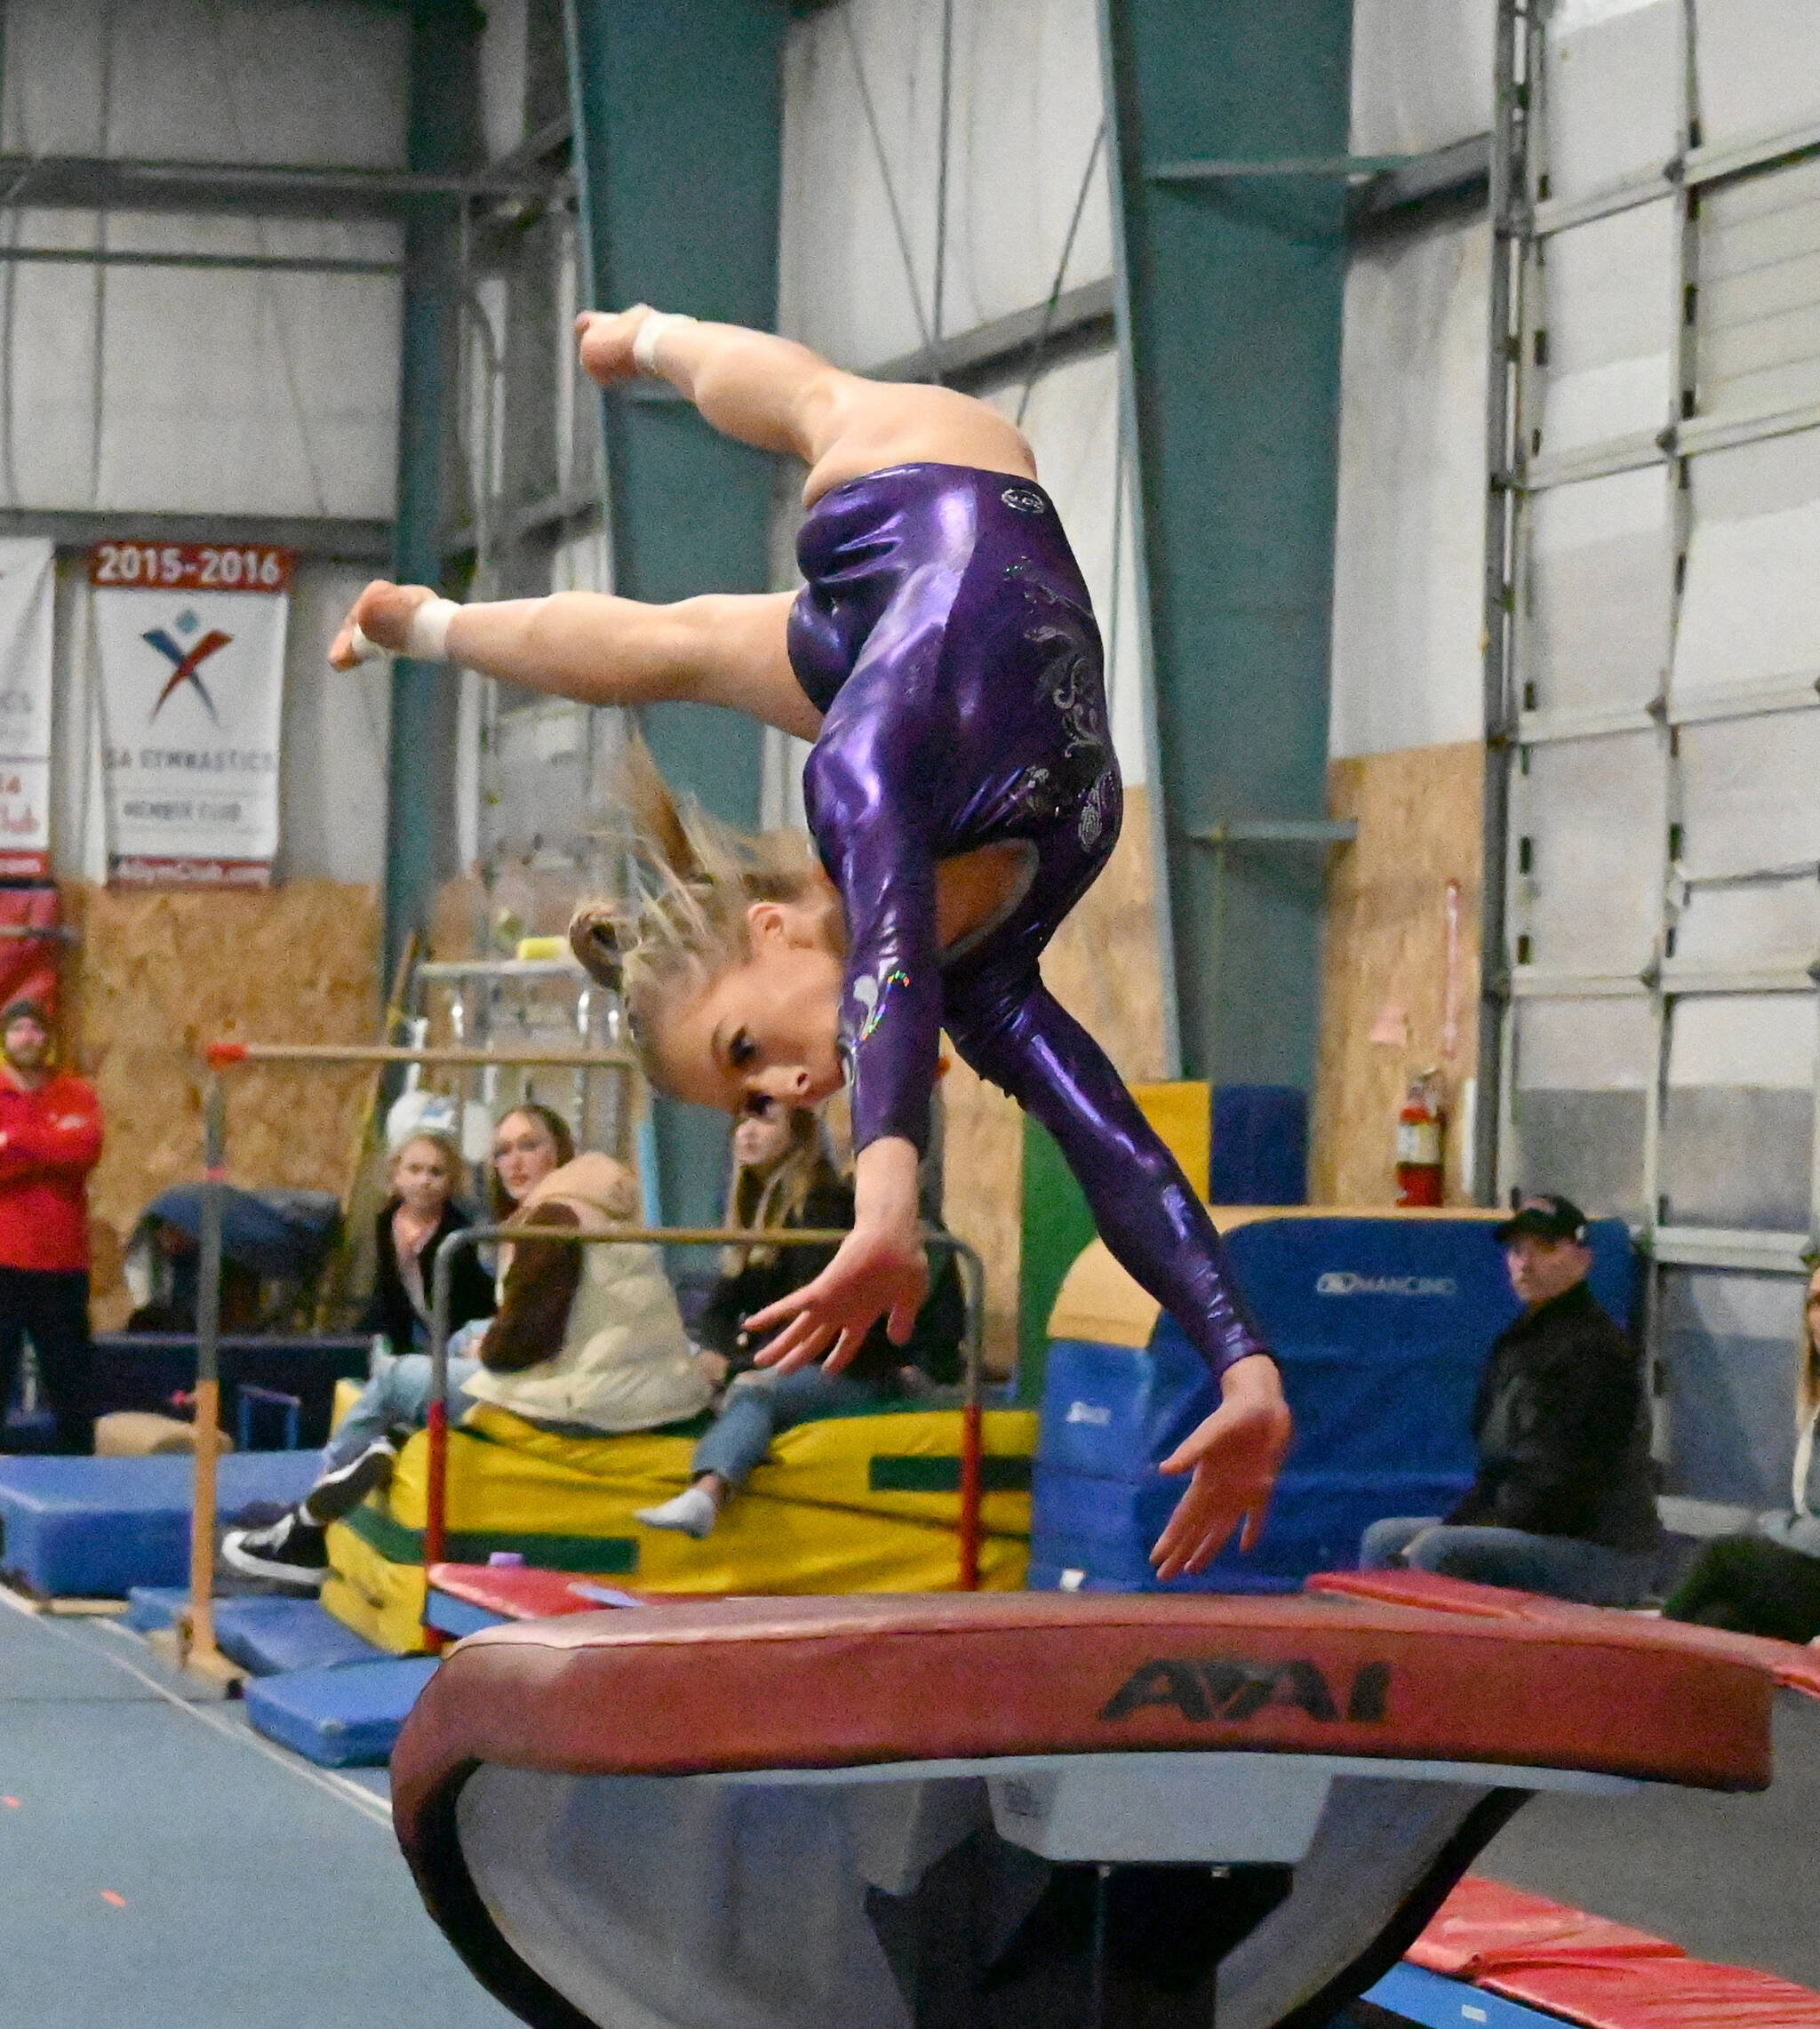 Sequim Gazette photos by Michael Dashiell
Sequim’s Kori Miller competes in the vault event at a home meet against Bainbridge at the Klahhane Gymnastics Center on Jan. 11. Miller placed first in the event with 8.6 points.